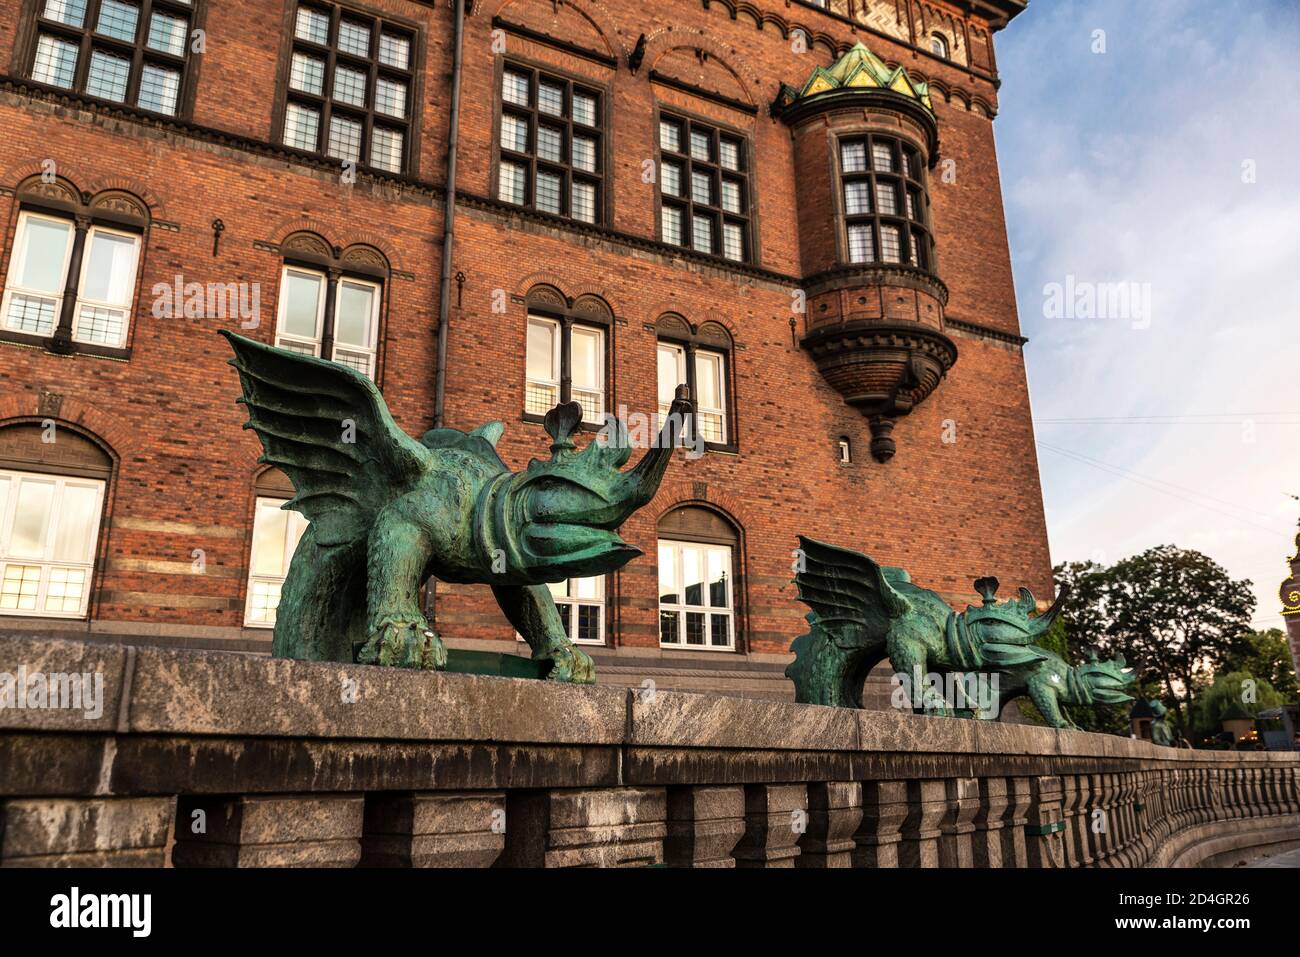 Statue of gallifant or gallifante, imaginary animal half rooster half elephant, in the Copenhagen City Hall in City Hall Square or Rådhuspladsen in th Stock Photo